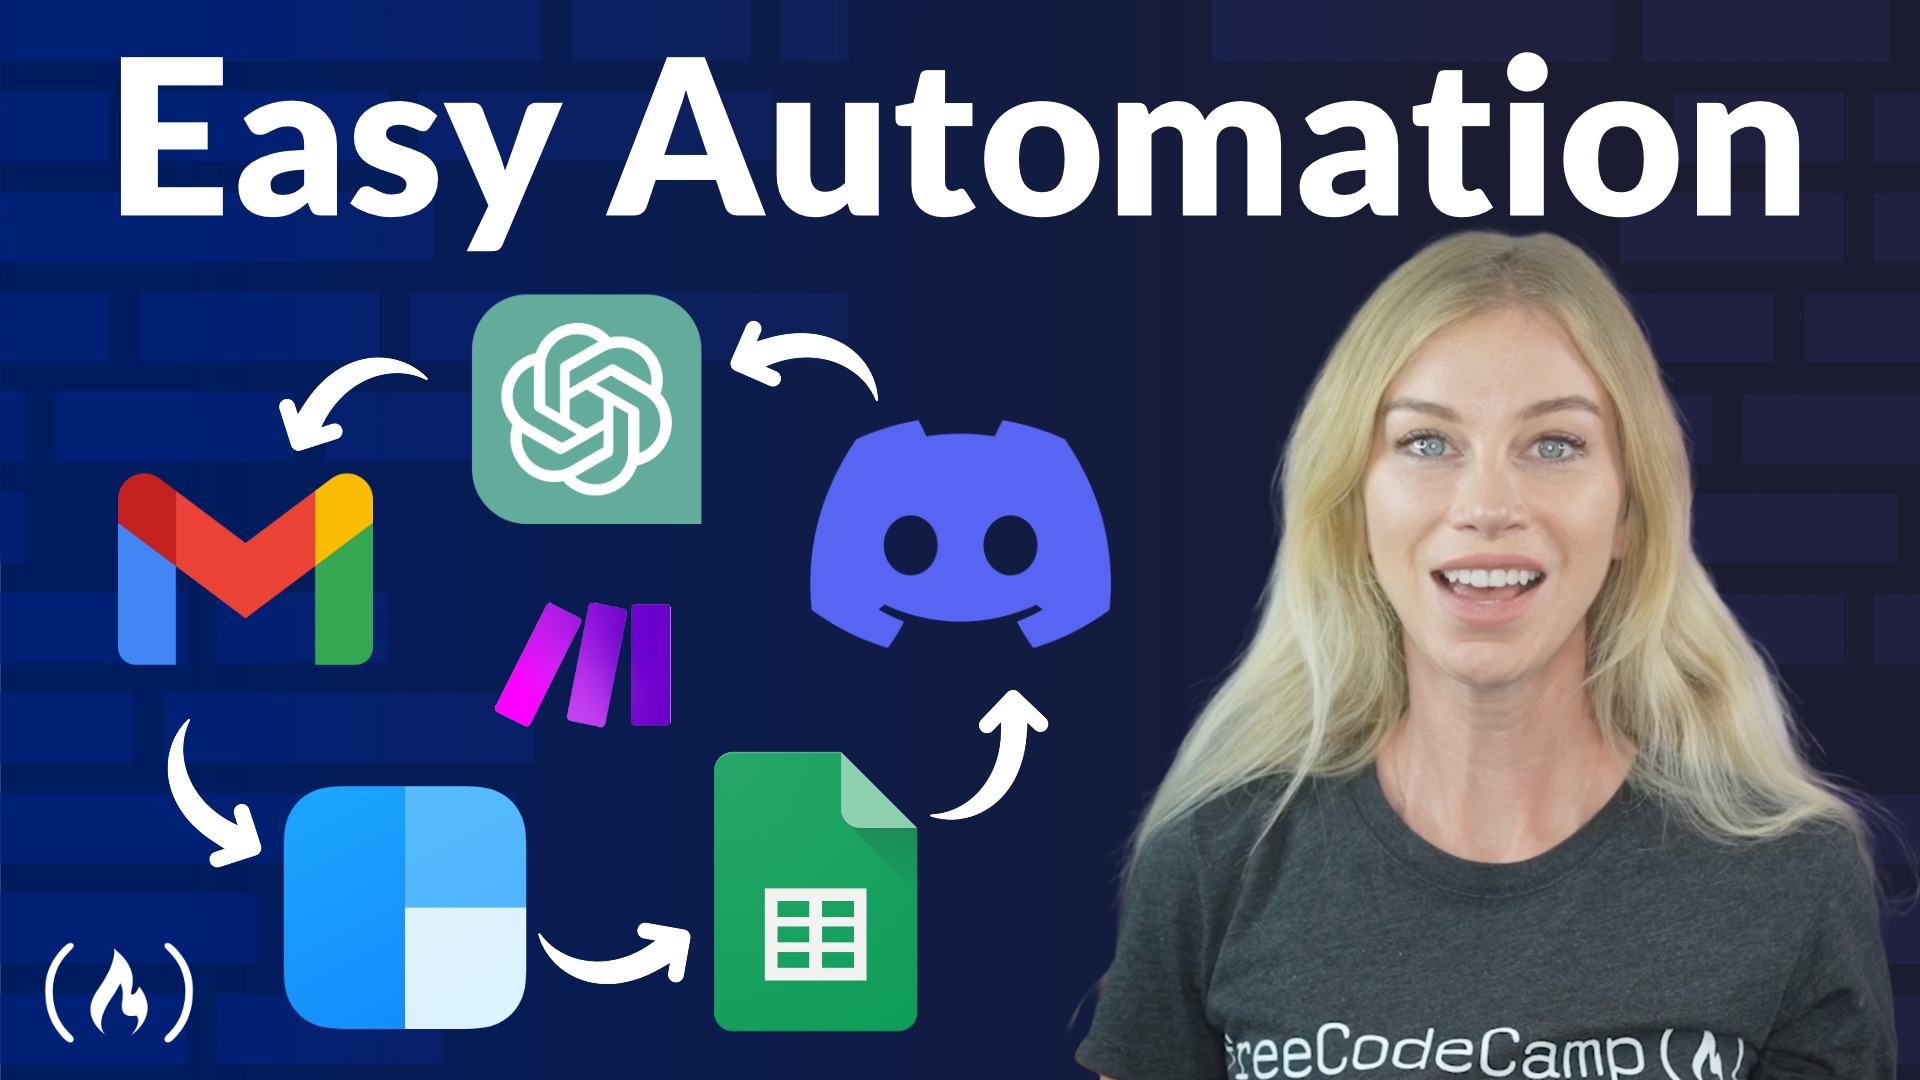 Learn how to Automate Your Boring Tasks. No-Code Automation [Full Course]